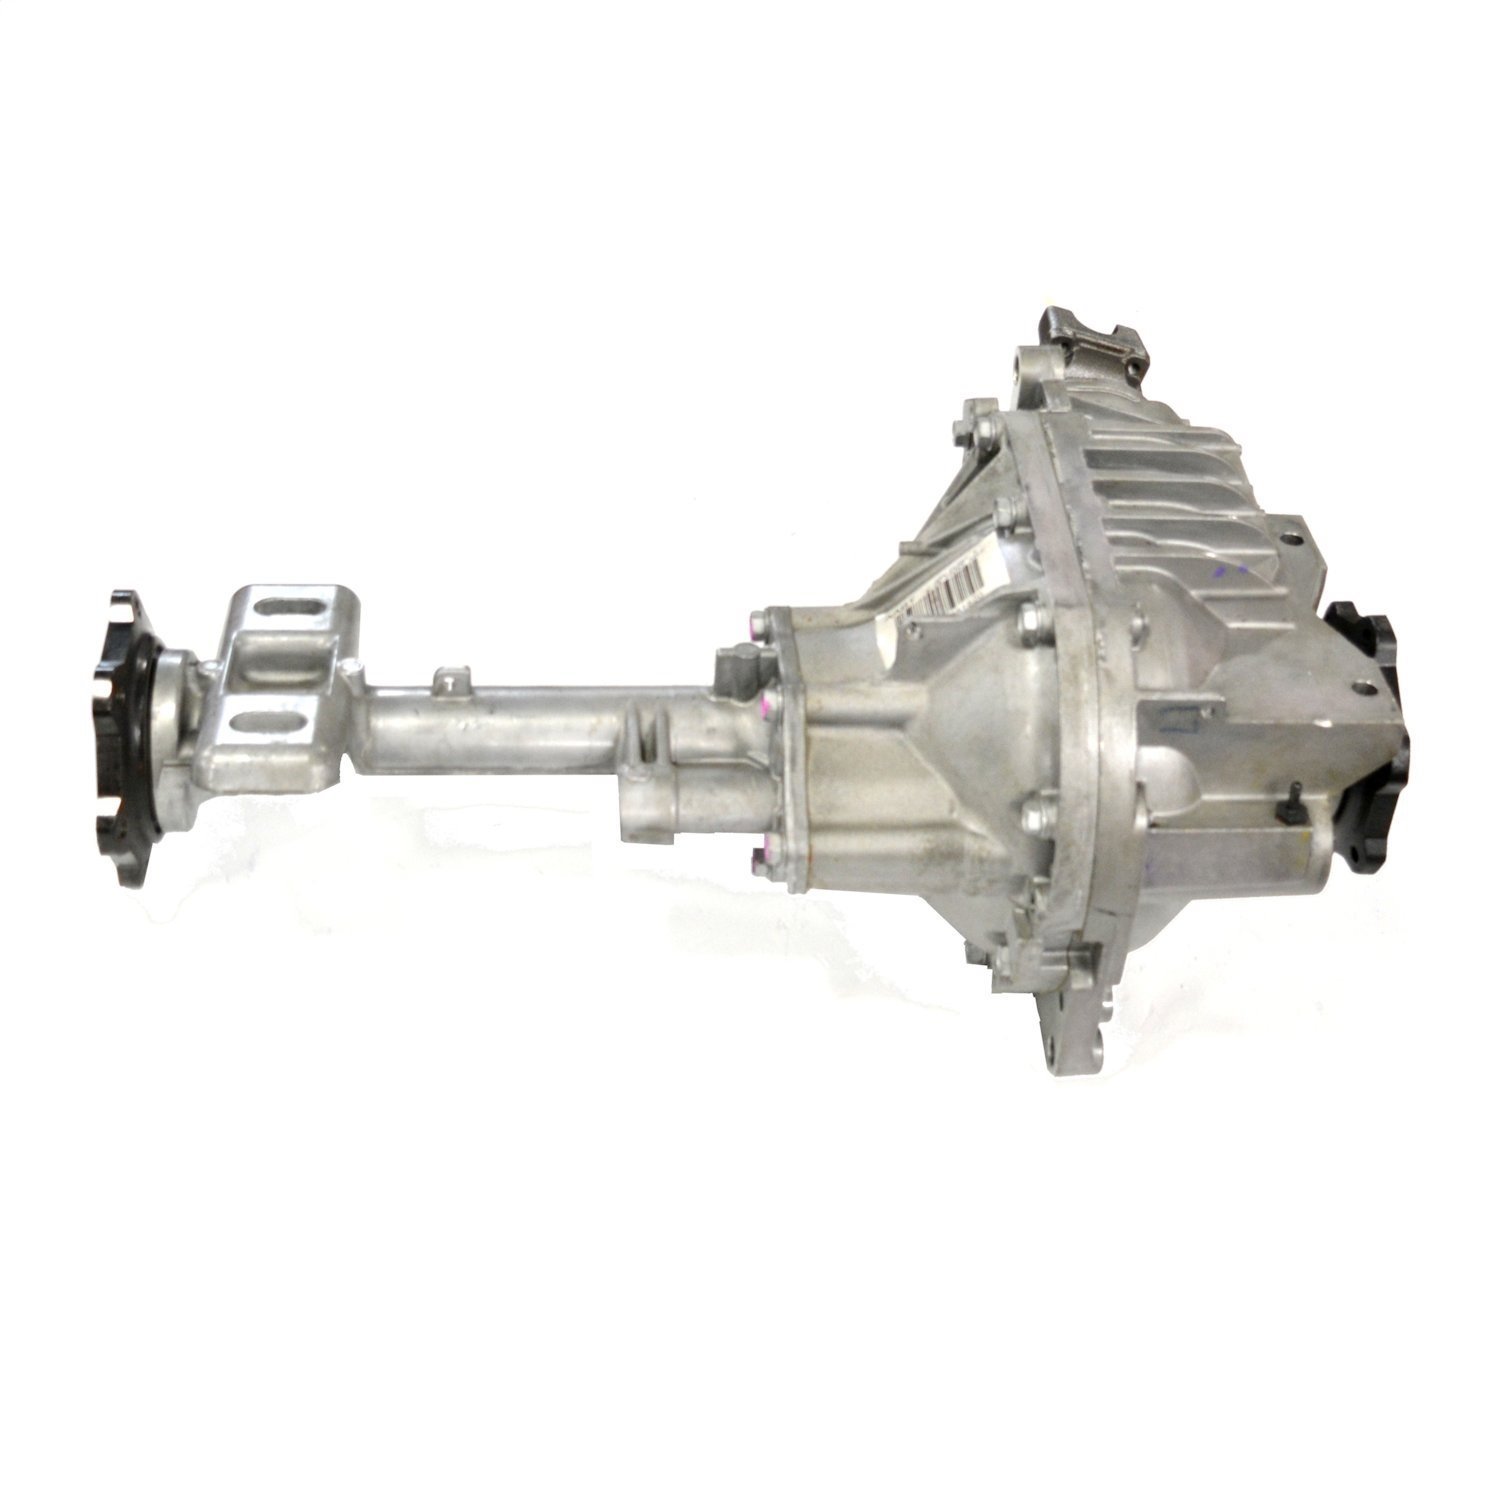 Remanufactured Front Axle Assy, GM 8.25IFS, 2015-18 GM 1500 Truck and SUV, 3.23 Ratio